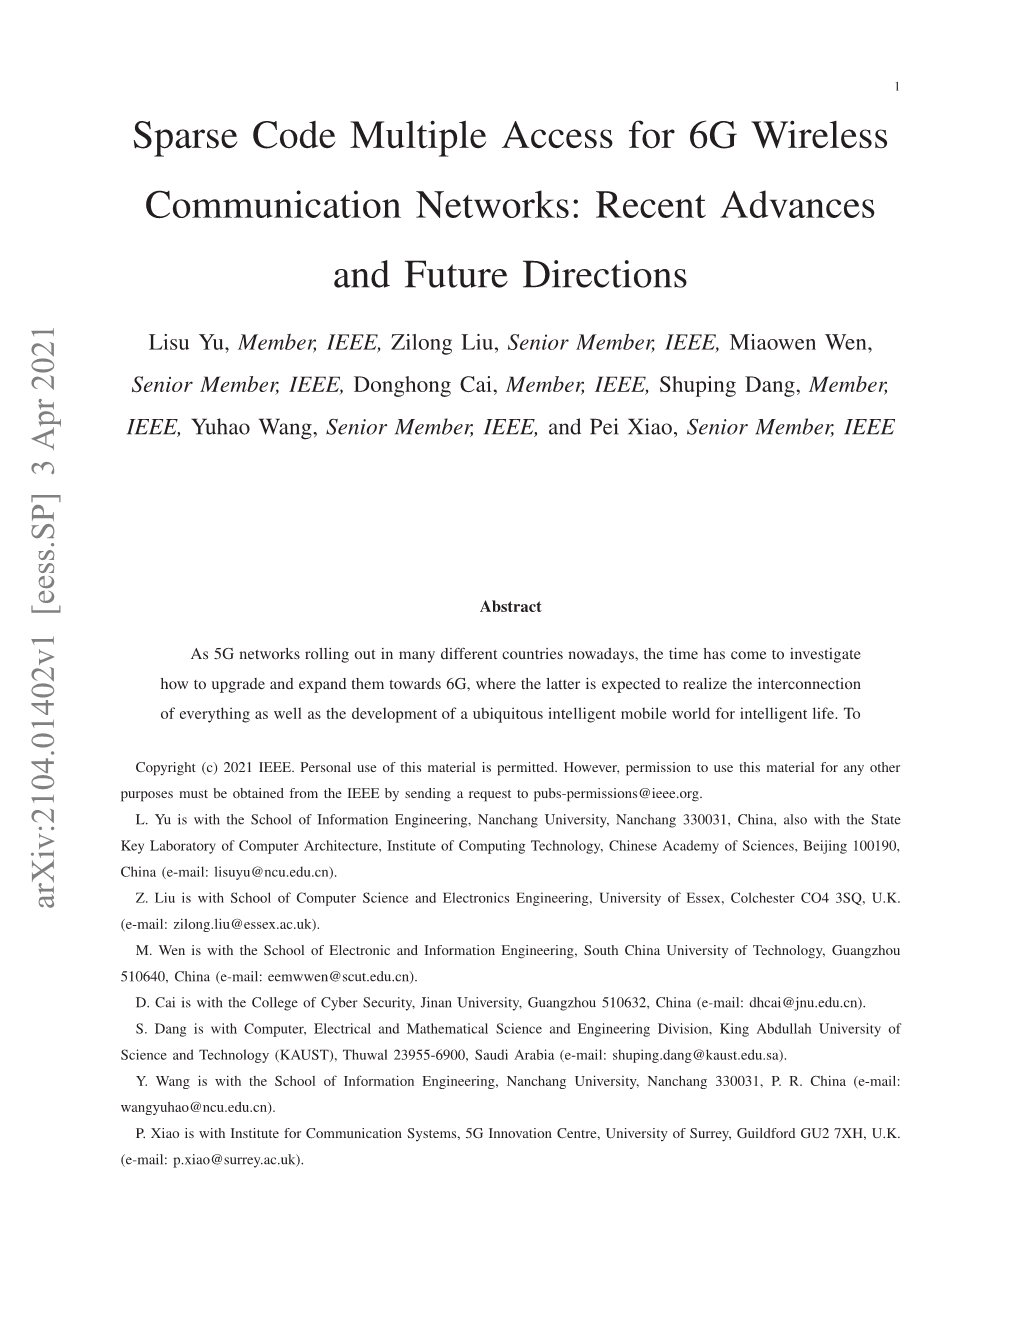 Sparse Code Multiple Access for 6G Wireless Communication